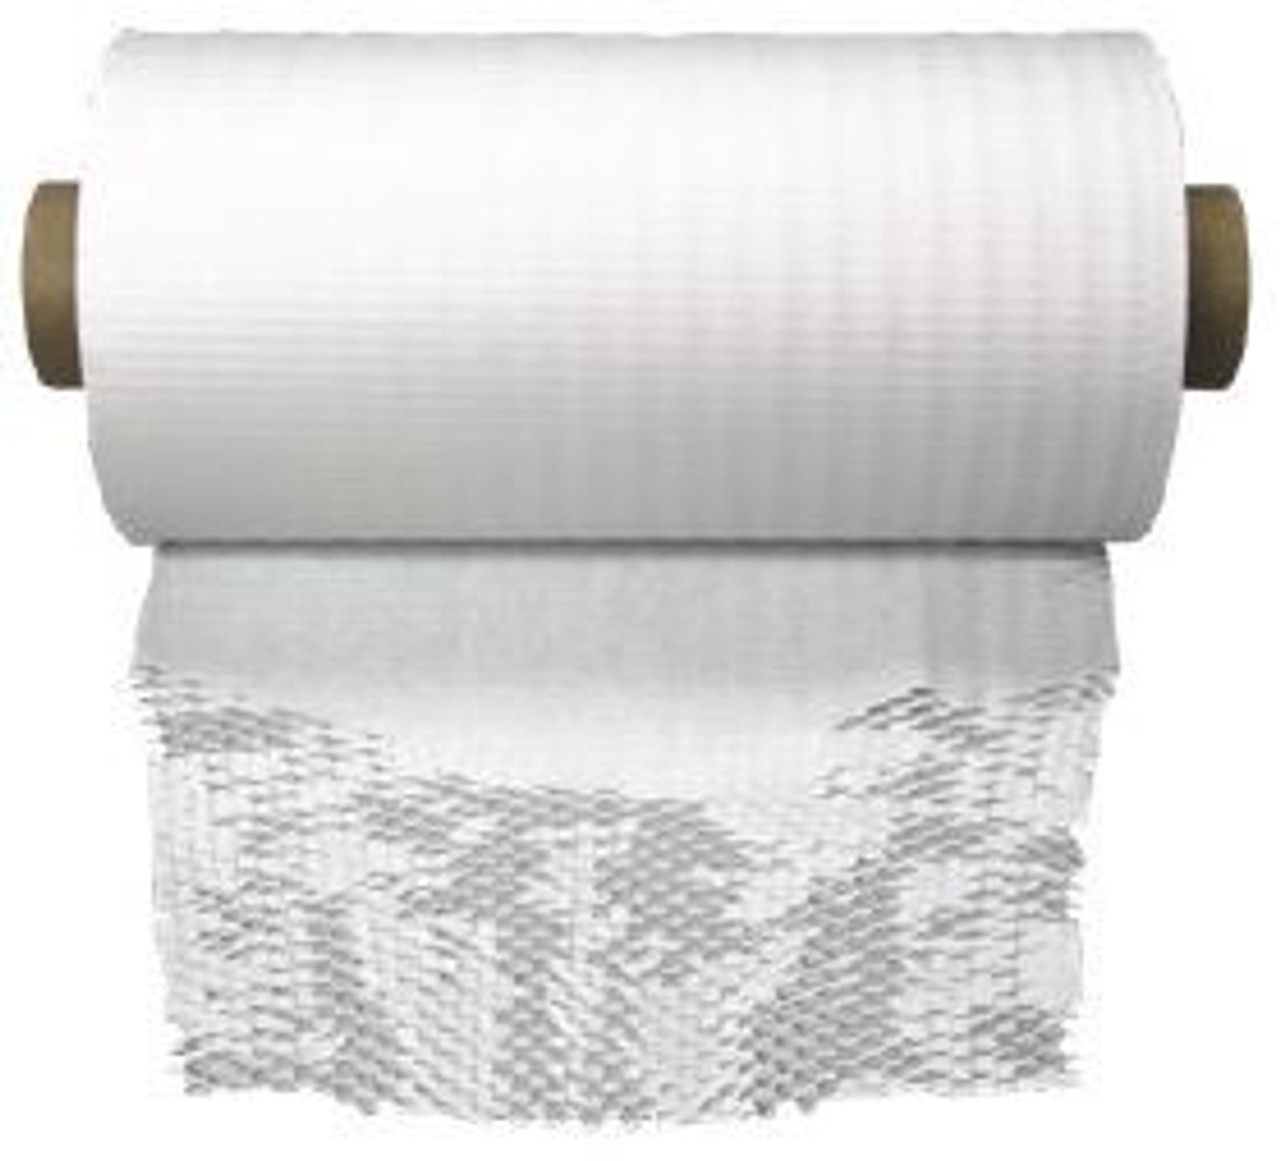 HexcelWrap™ 12 x 1400' Rolls White Honeycomb Cushioning Paper (Use with  #YZMPS-1100 Sold Separately)